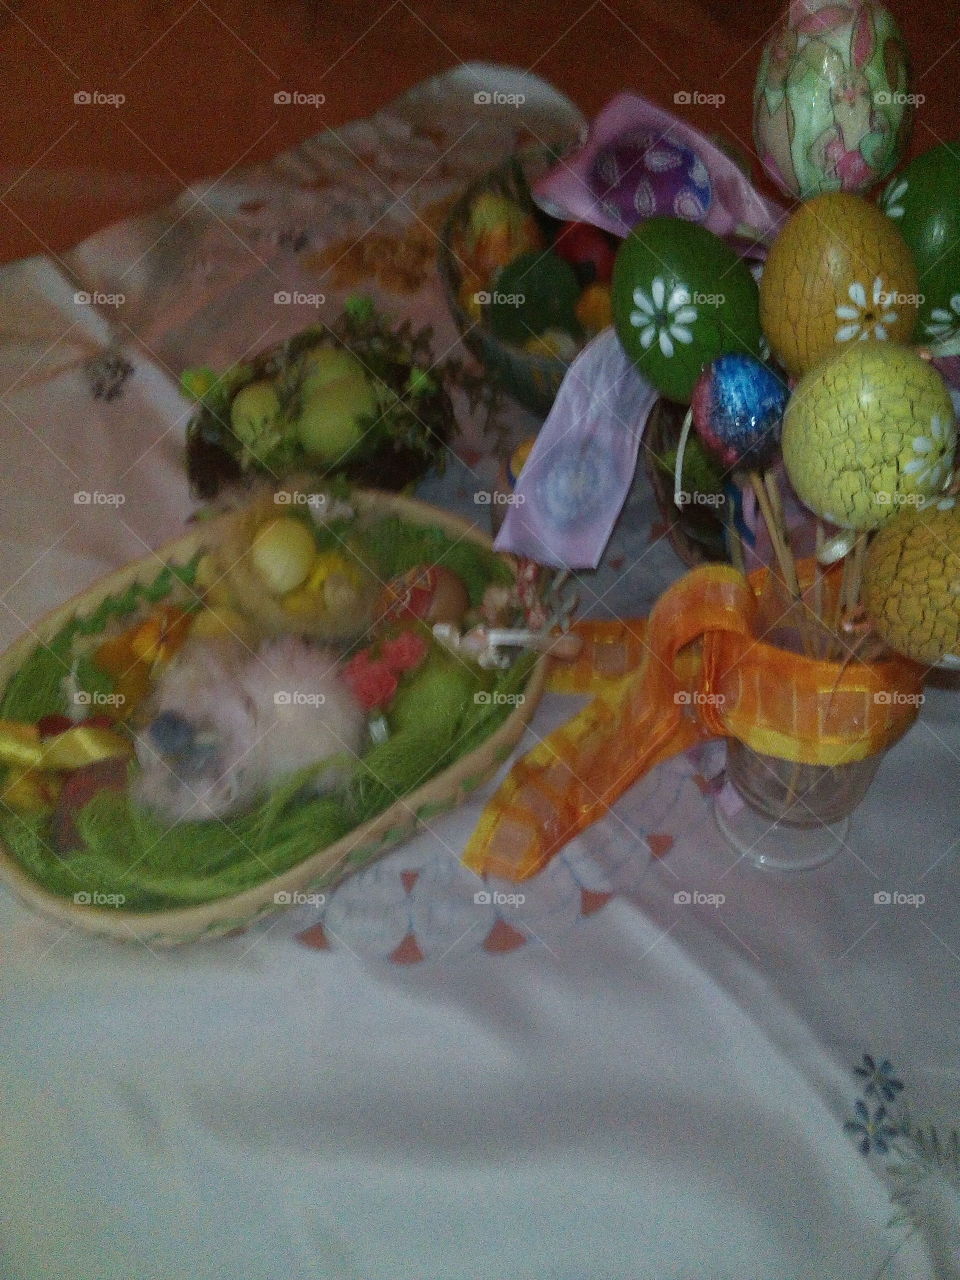 easter table decoration